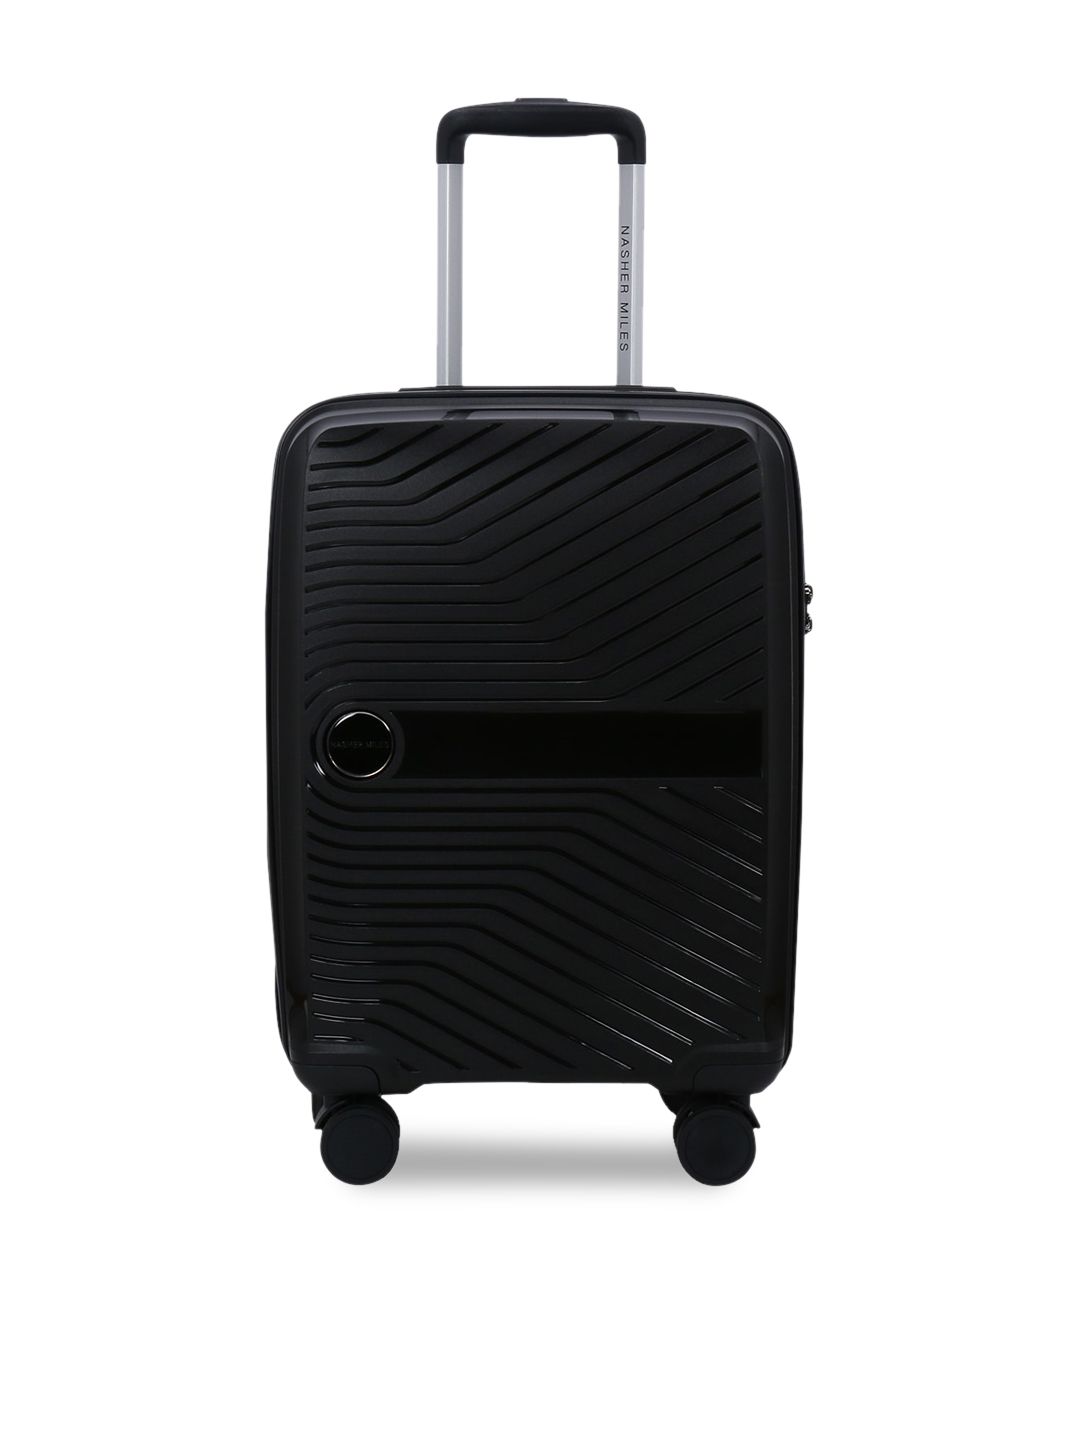 Nasher Miles Unisex Black Textured Hard Sided Small Trolley Suitcase Price in India